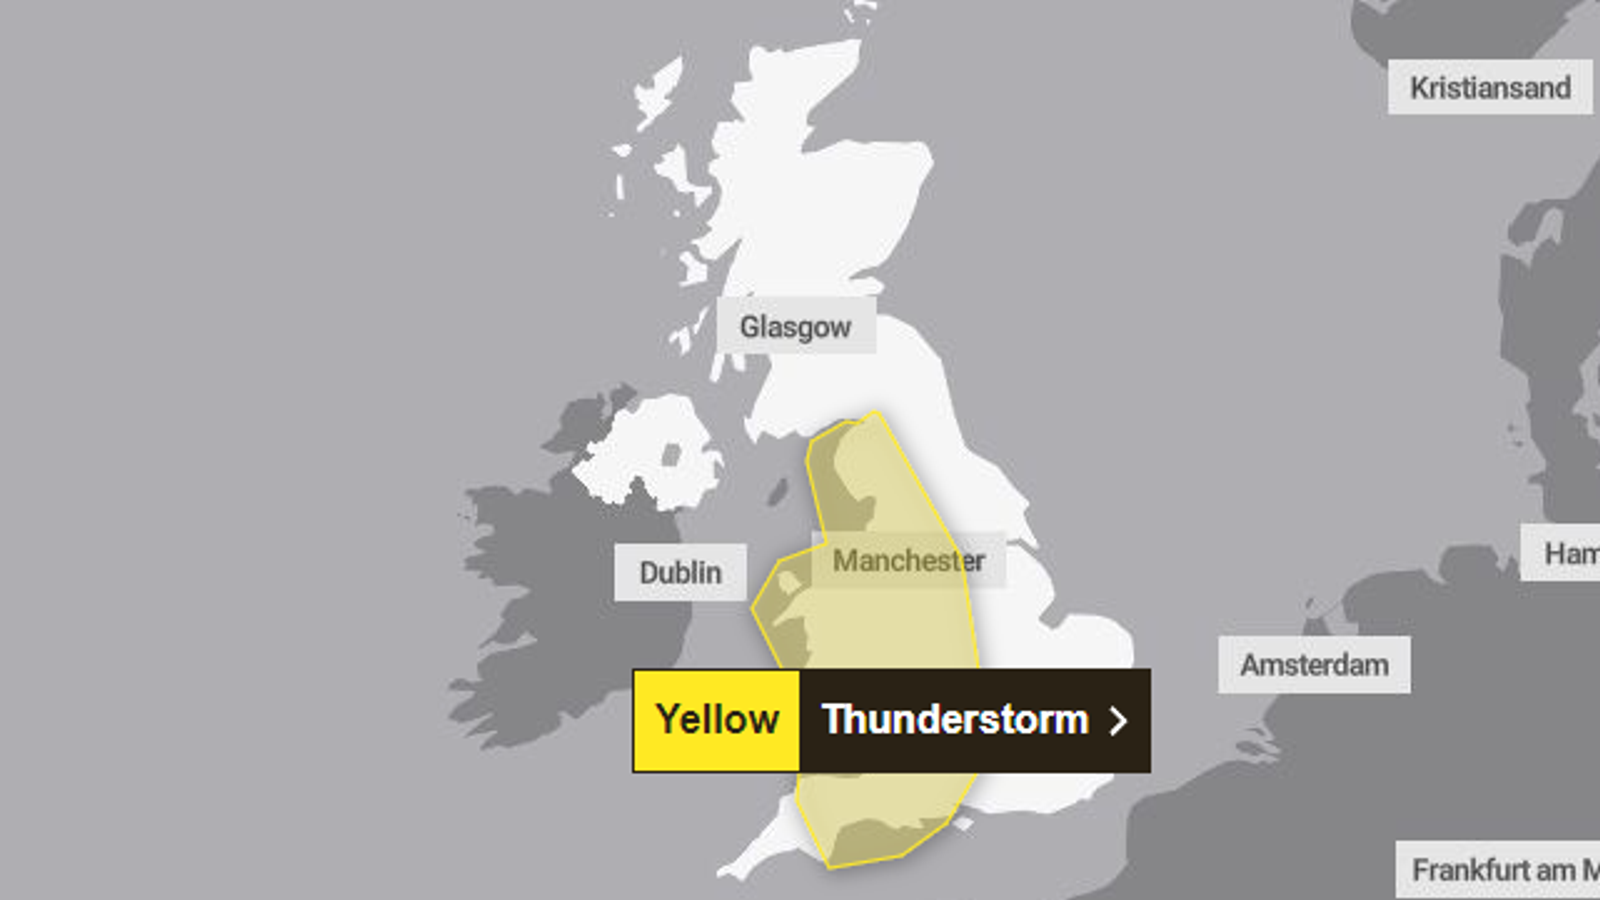 thunderstorm warning for large parts of uk after temperatures set to reach as high as 27c